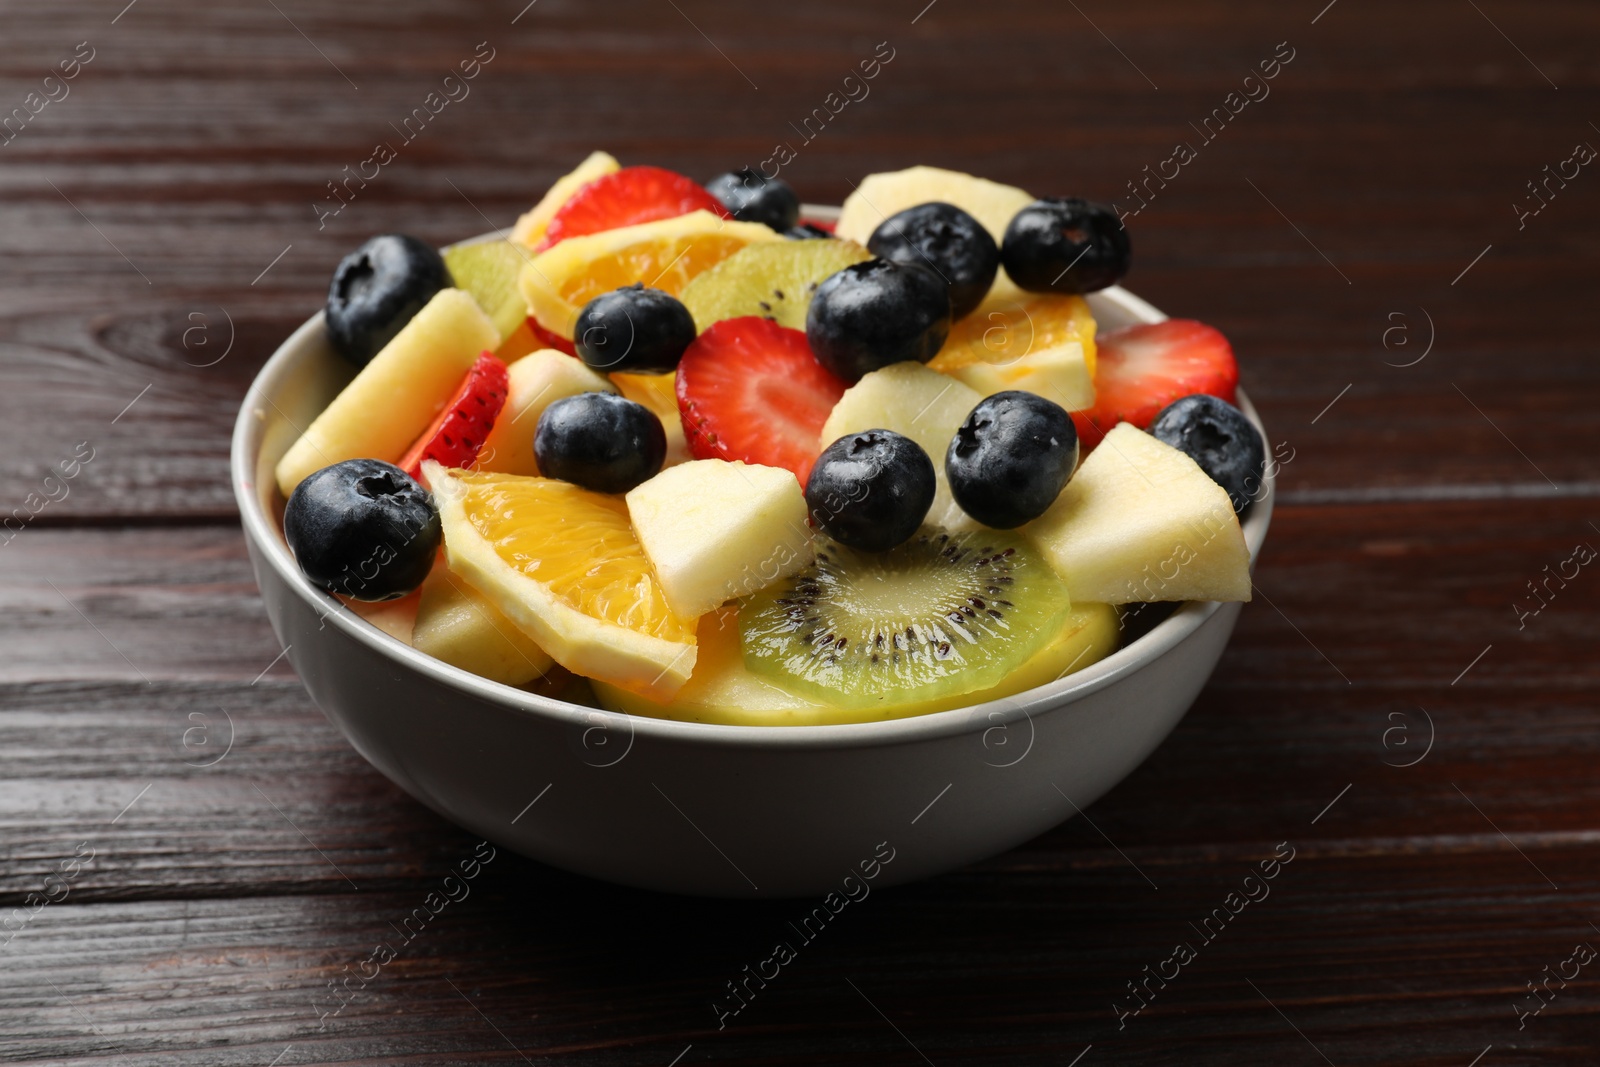 Photo of Tasty fruit salad in bowl on wooden table, closeup